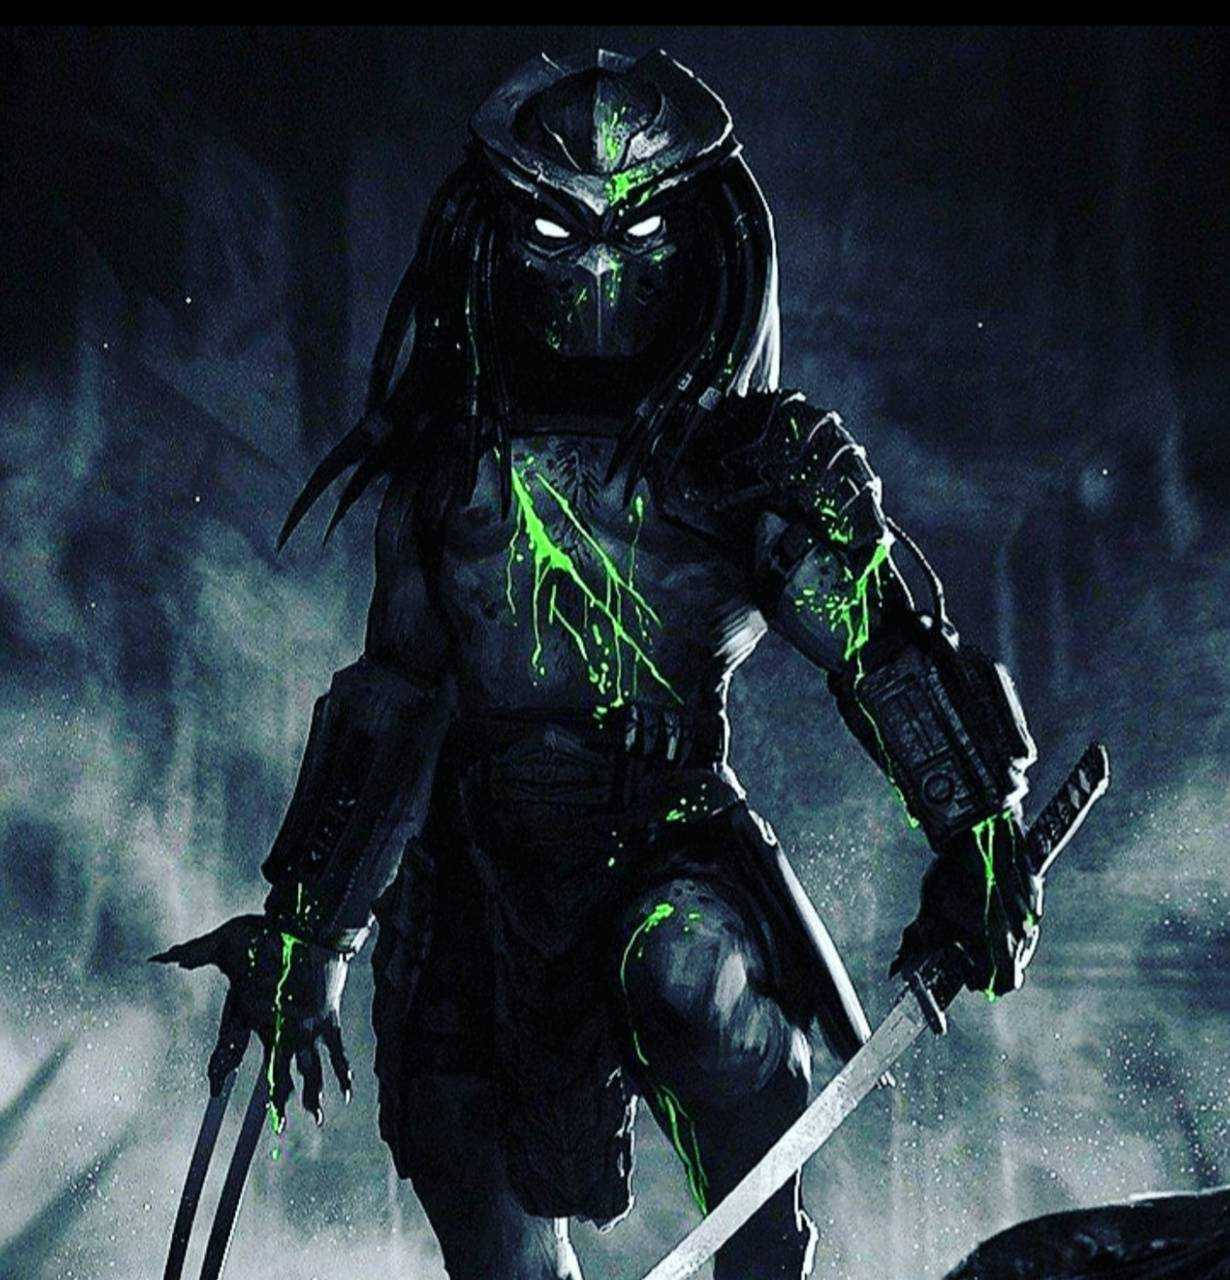 Predator Stepping Out - The Ultimate Alien Hunter Background